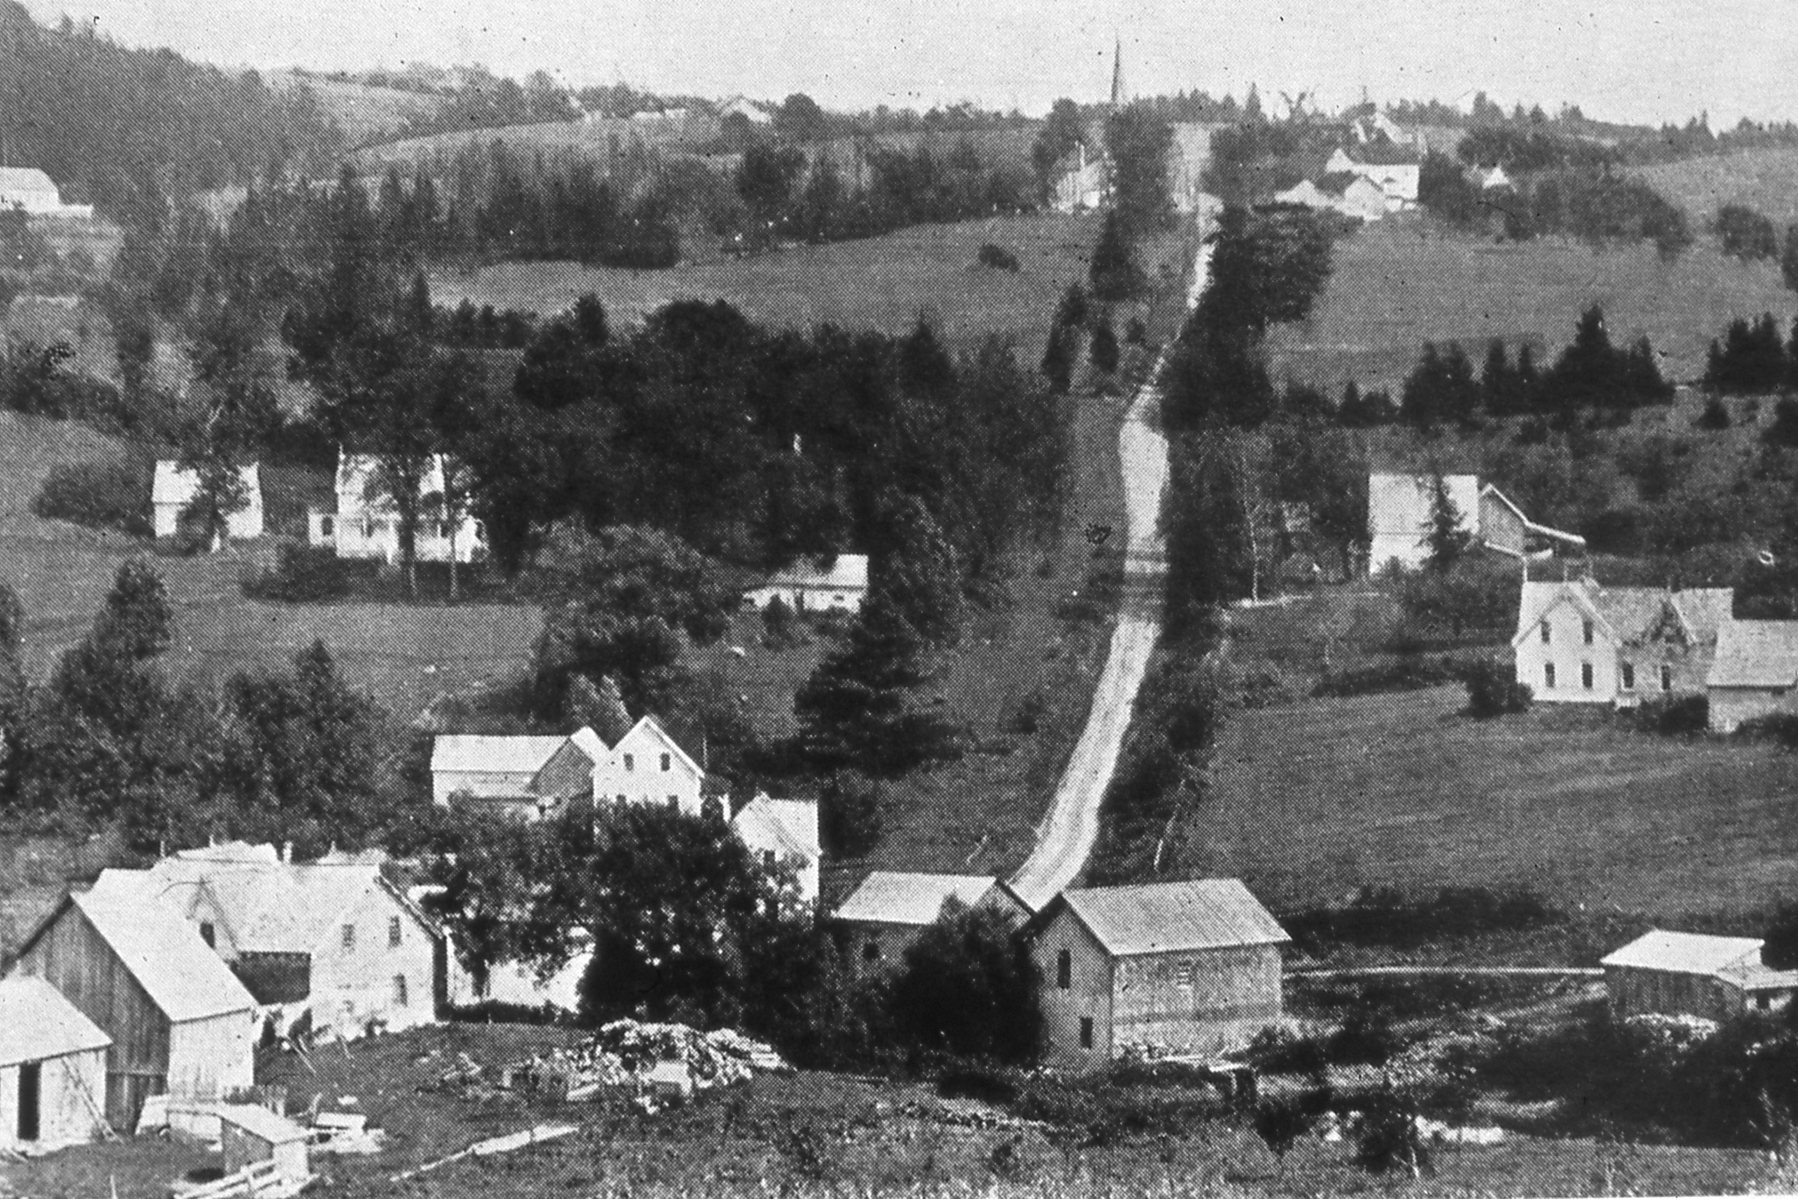 Circa 1900. Rural scene shows a church in the distance at the top of the hill. Homes and farms appear on either side of the steep hill down to the lower part of the town.